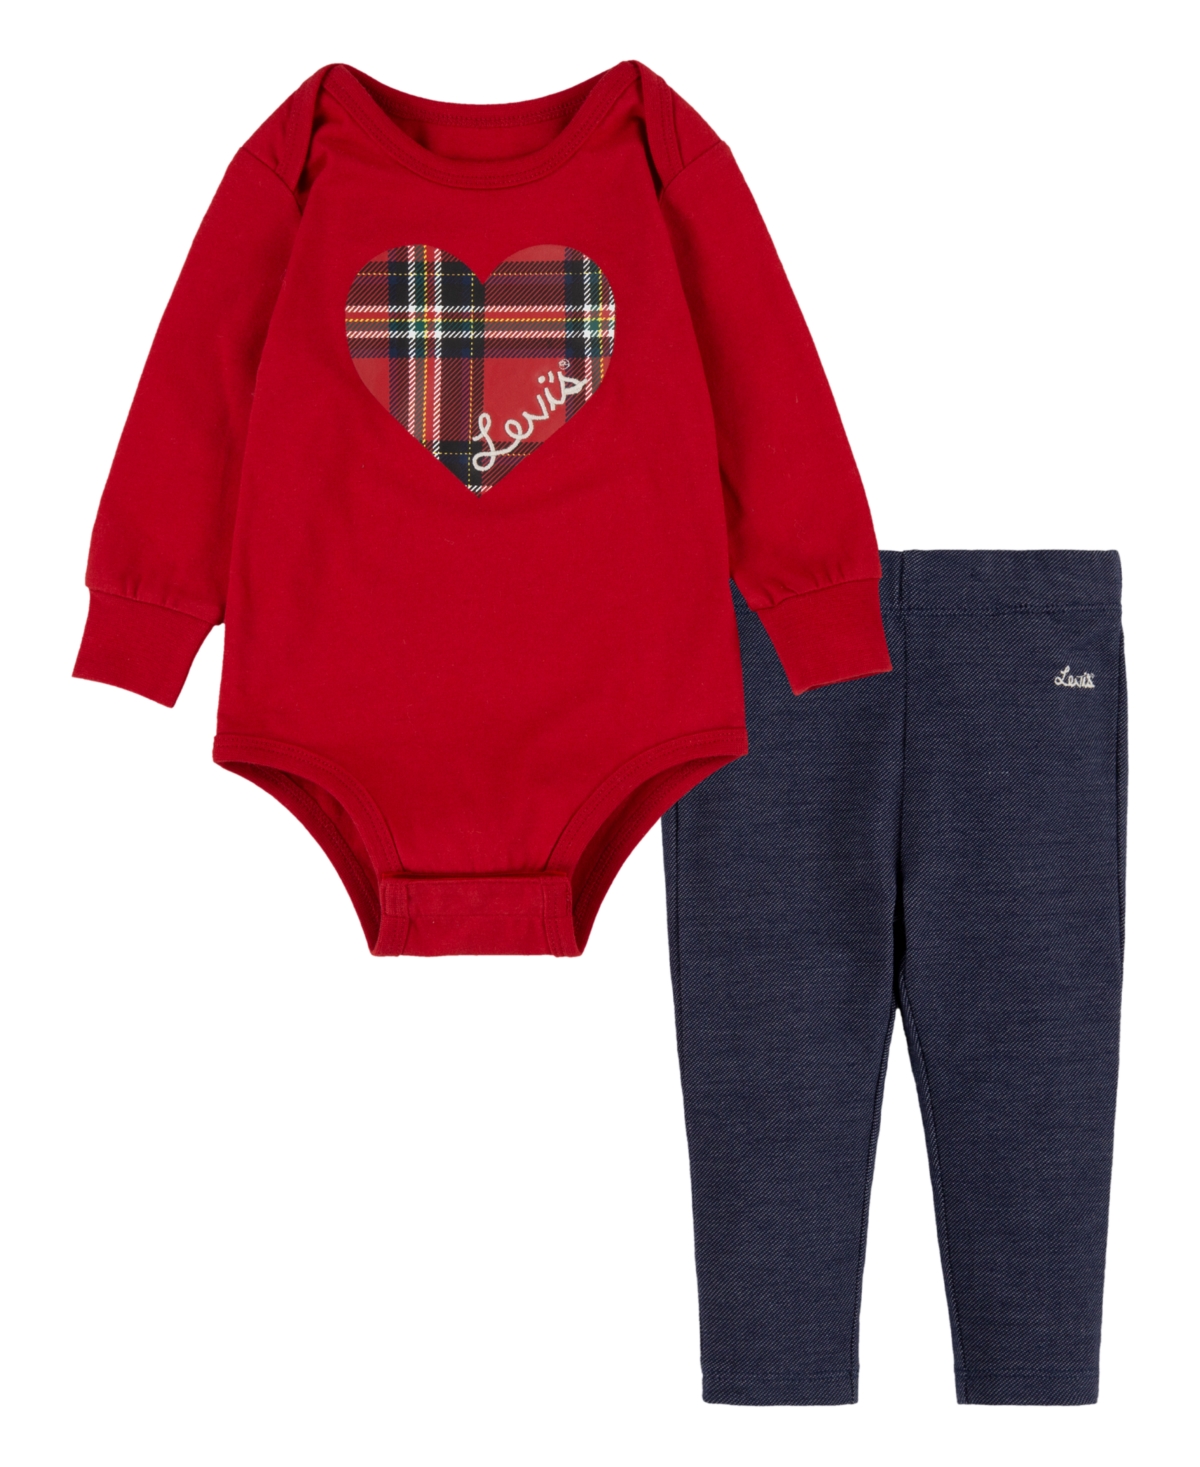 Levi's Baby Girls Plaid Bodysuit And Leggings, 2 Piece Gift Box Set In Chili Pepper